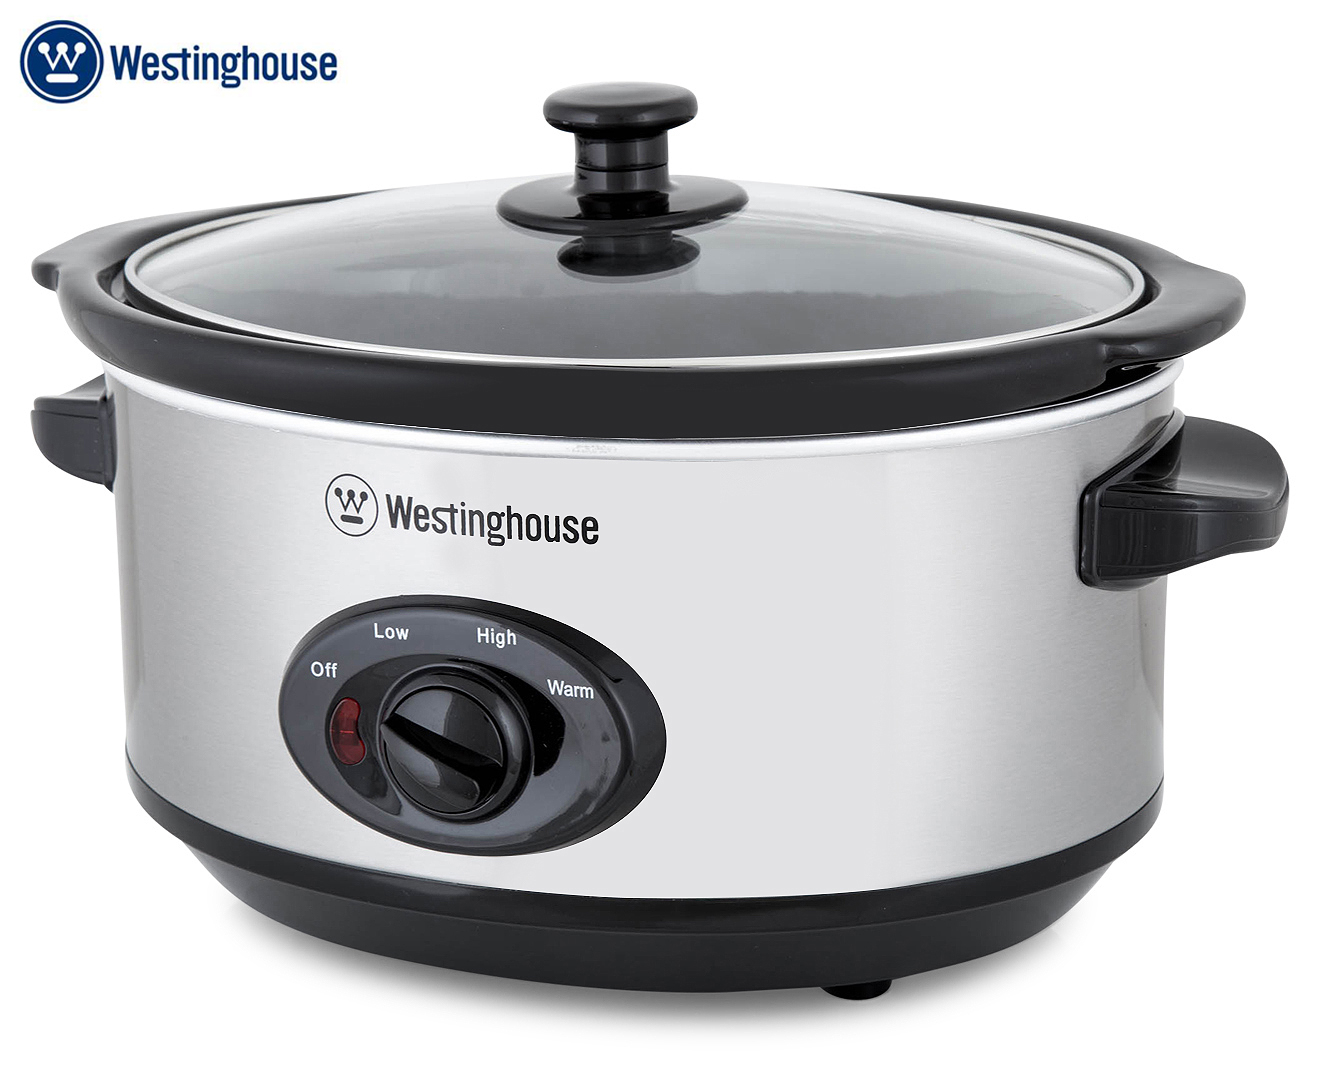 Westinghouse 3.5L Slow Cooker - Black/Brushed Stainless Steel